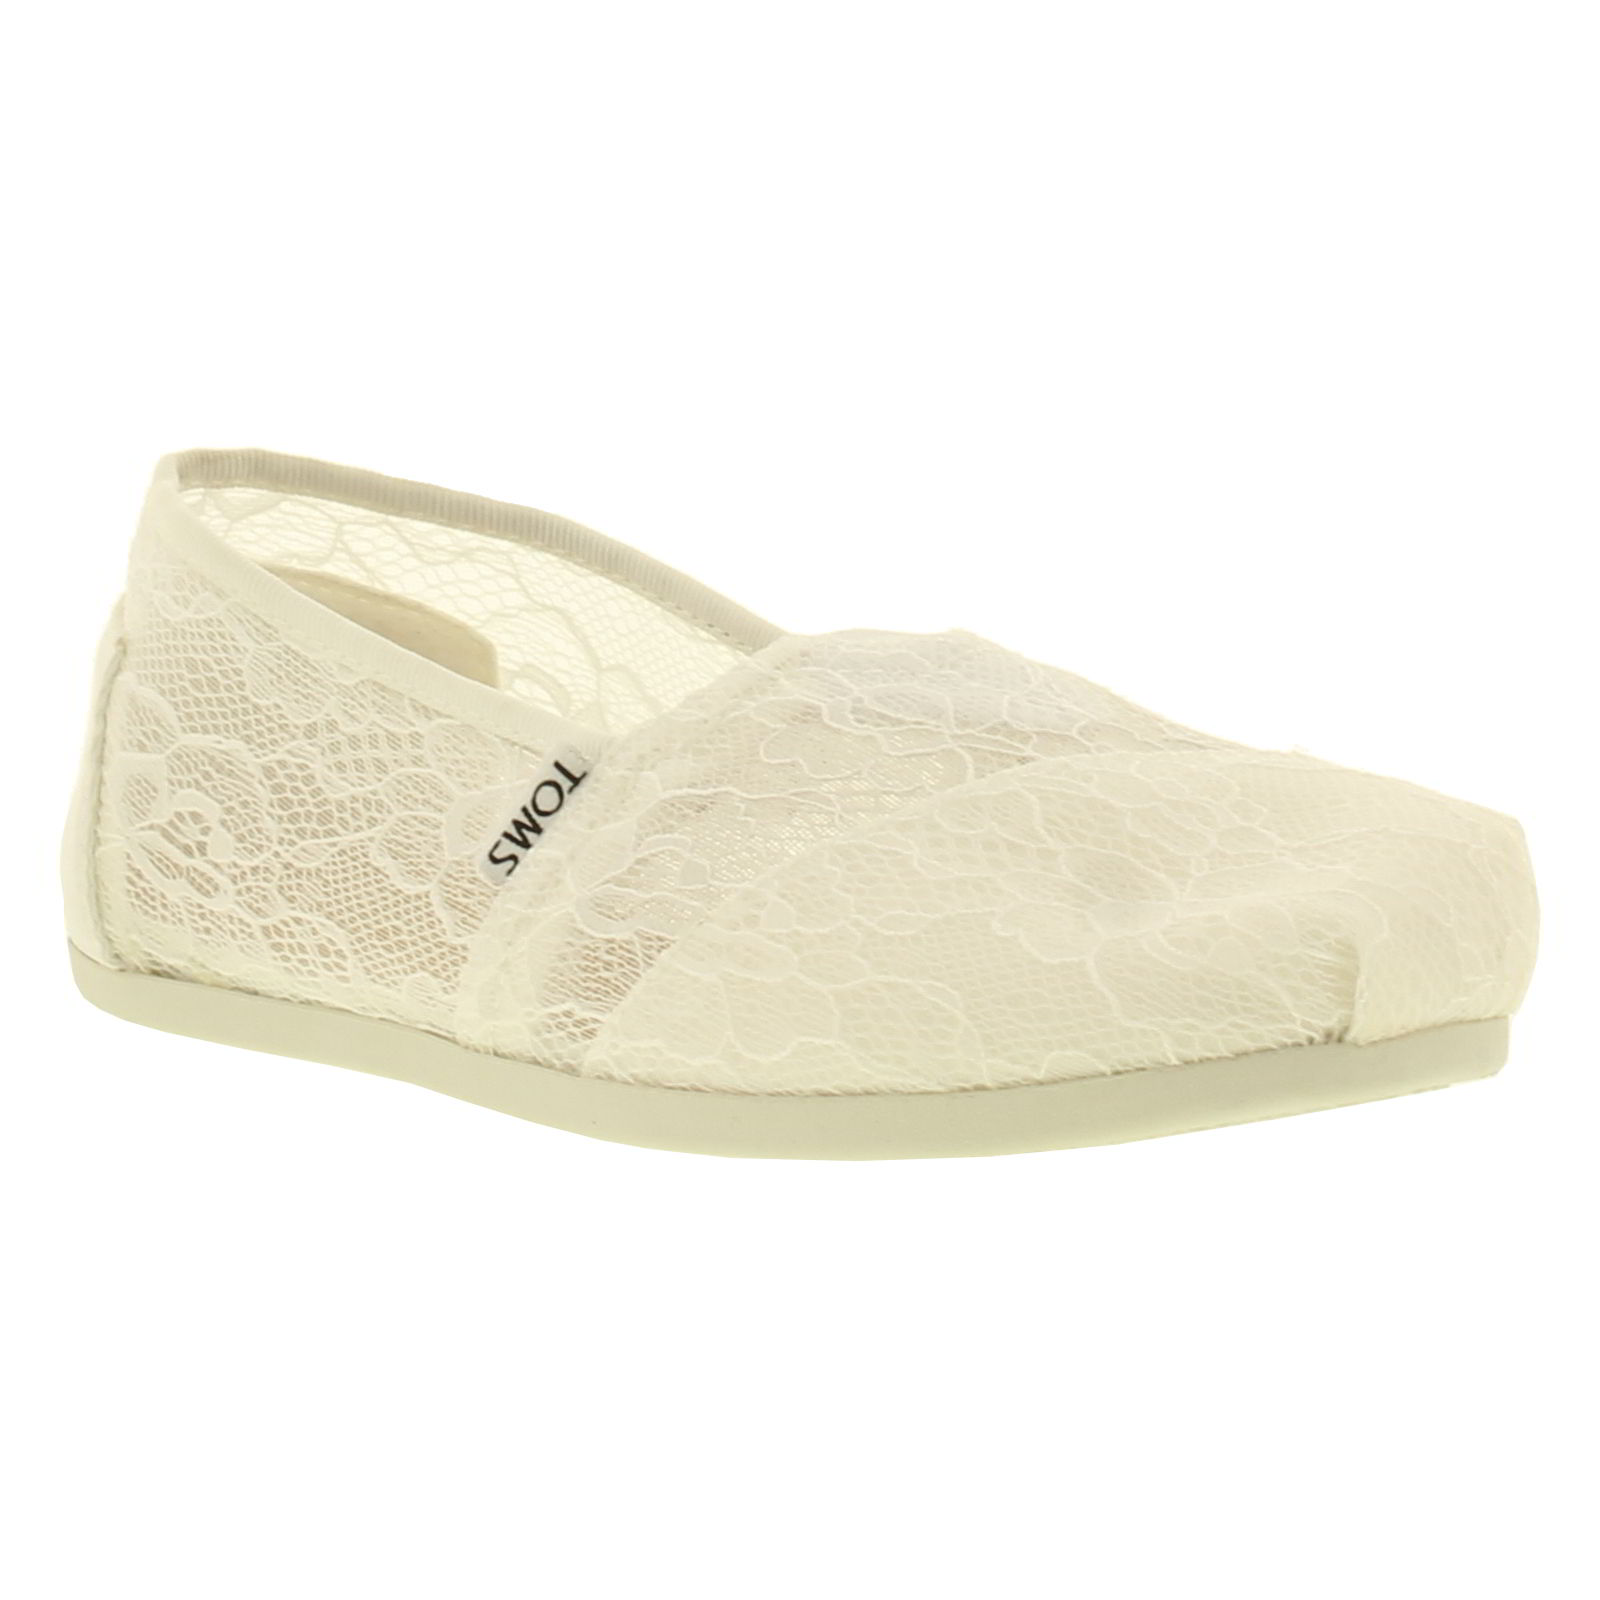 TOMS Toms Womens Classic Lace Slip On Espadrille Shoes - White 2951